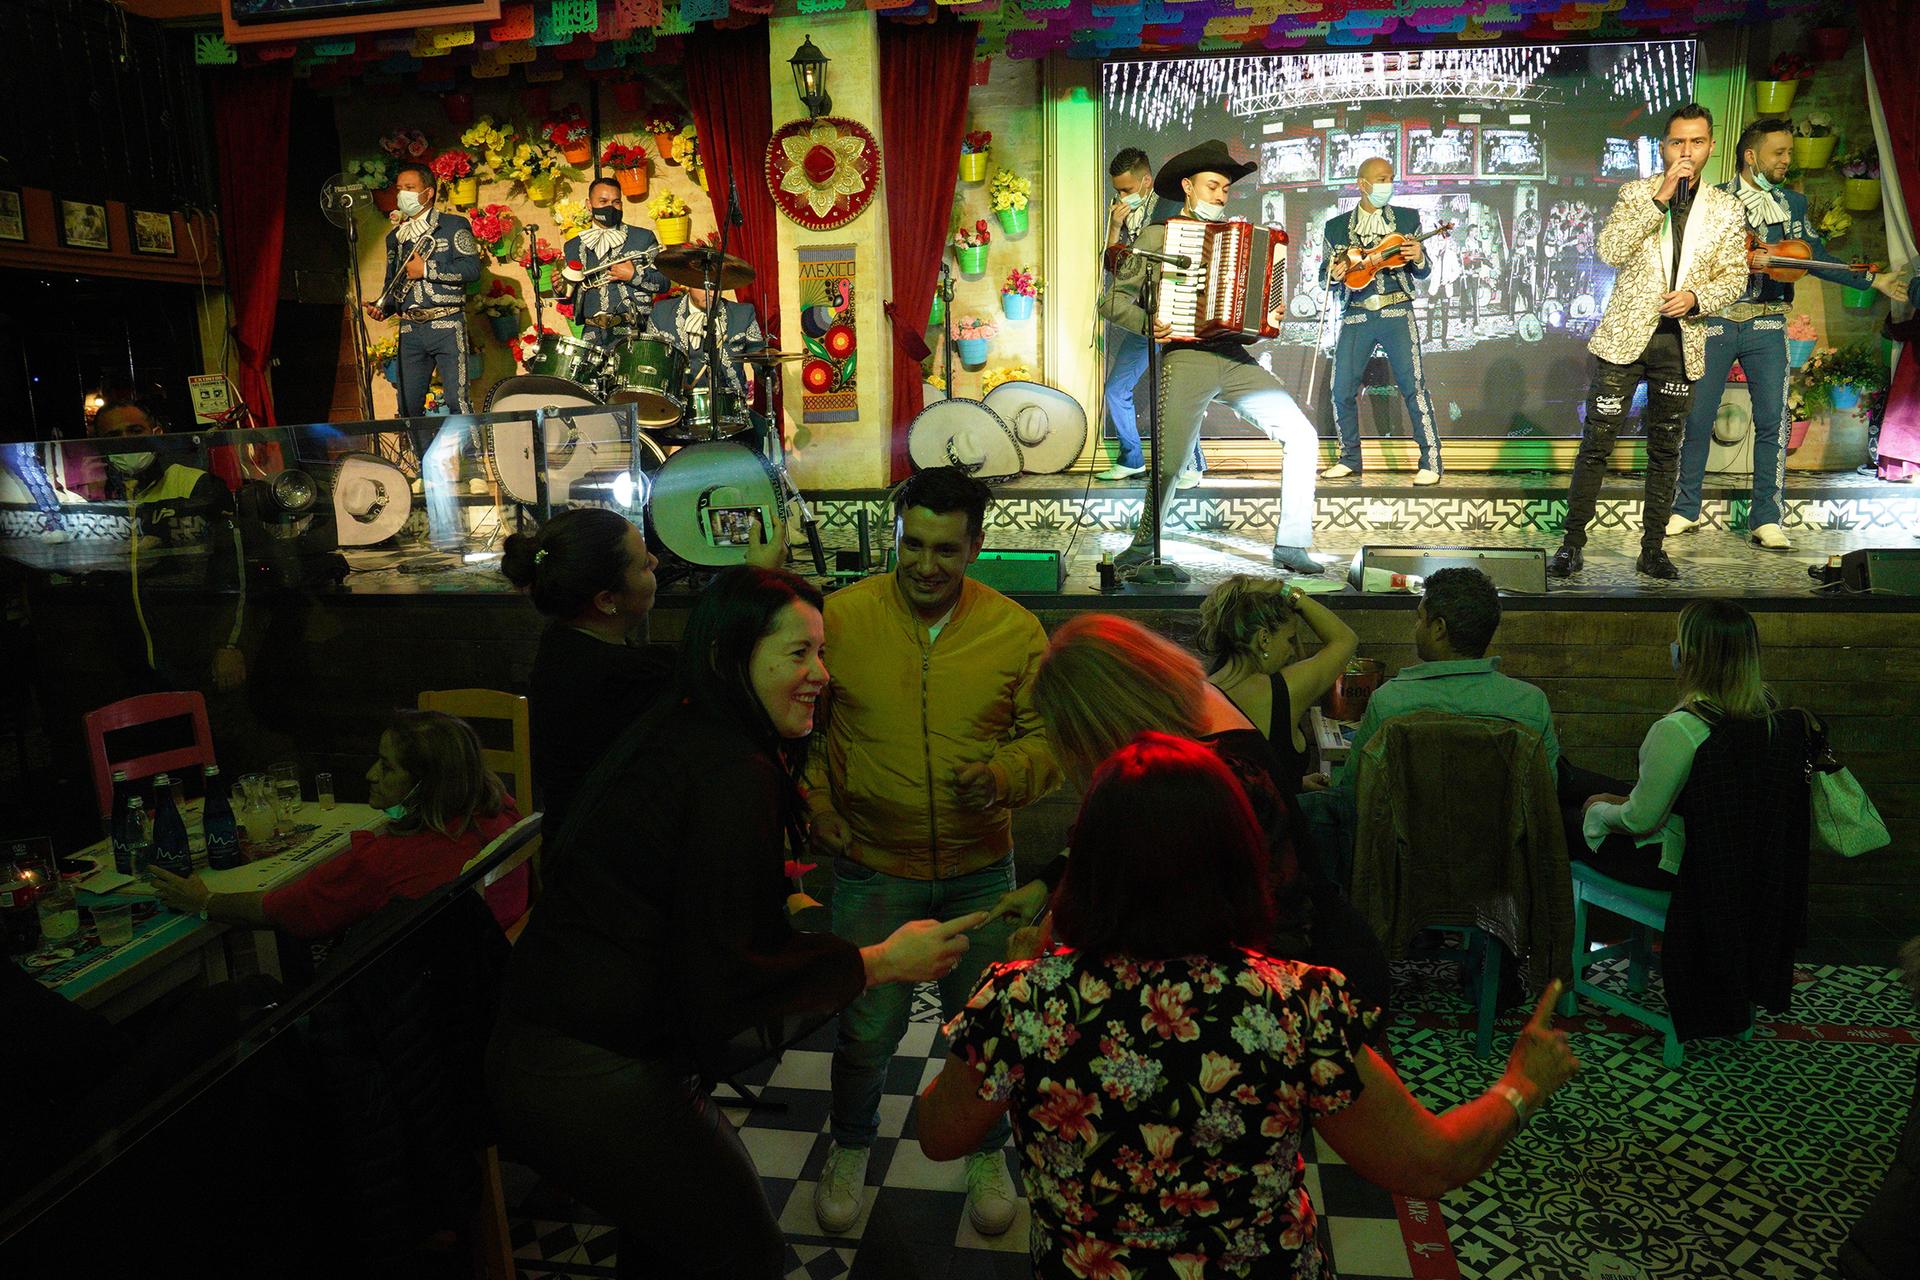 People mingle at the Plaza MX nightclub in Bogotá, Colombia